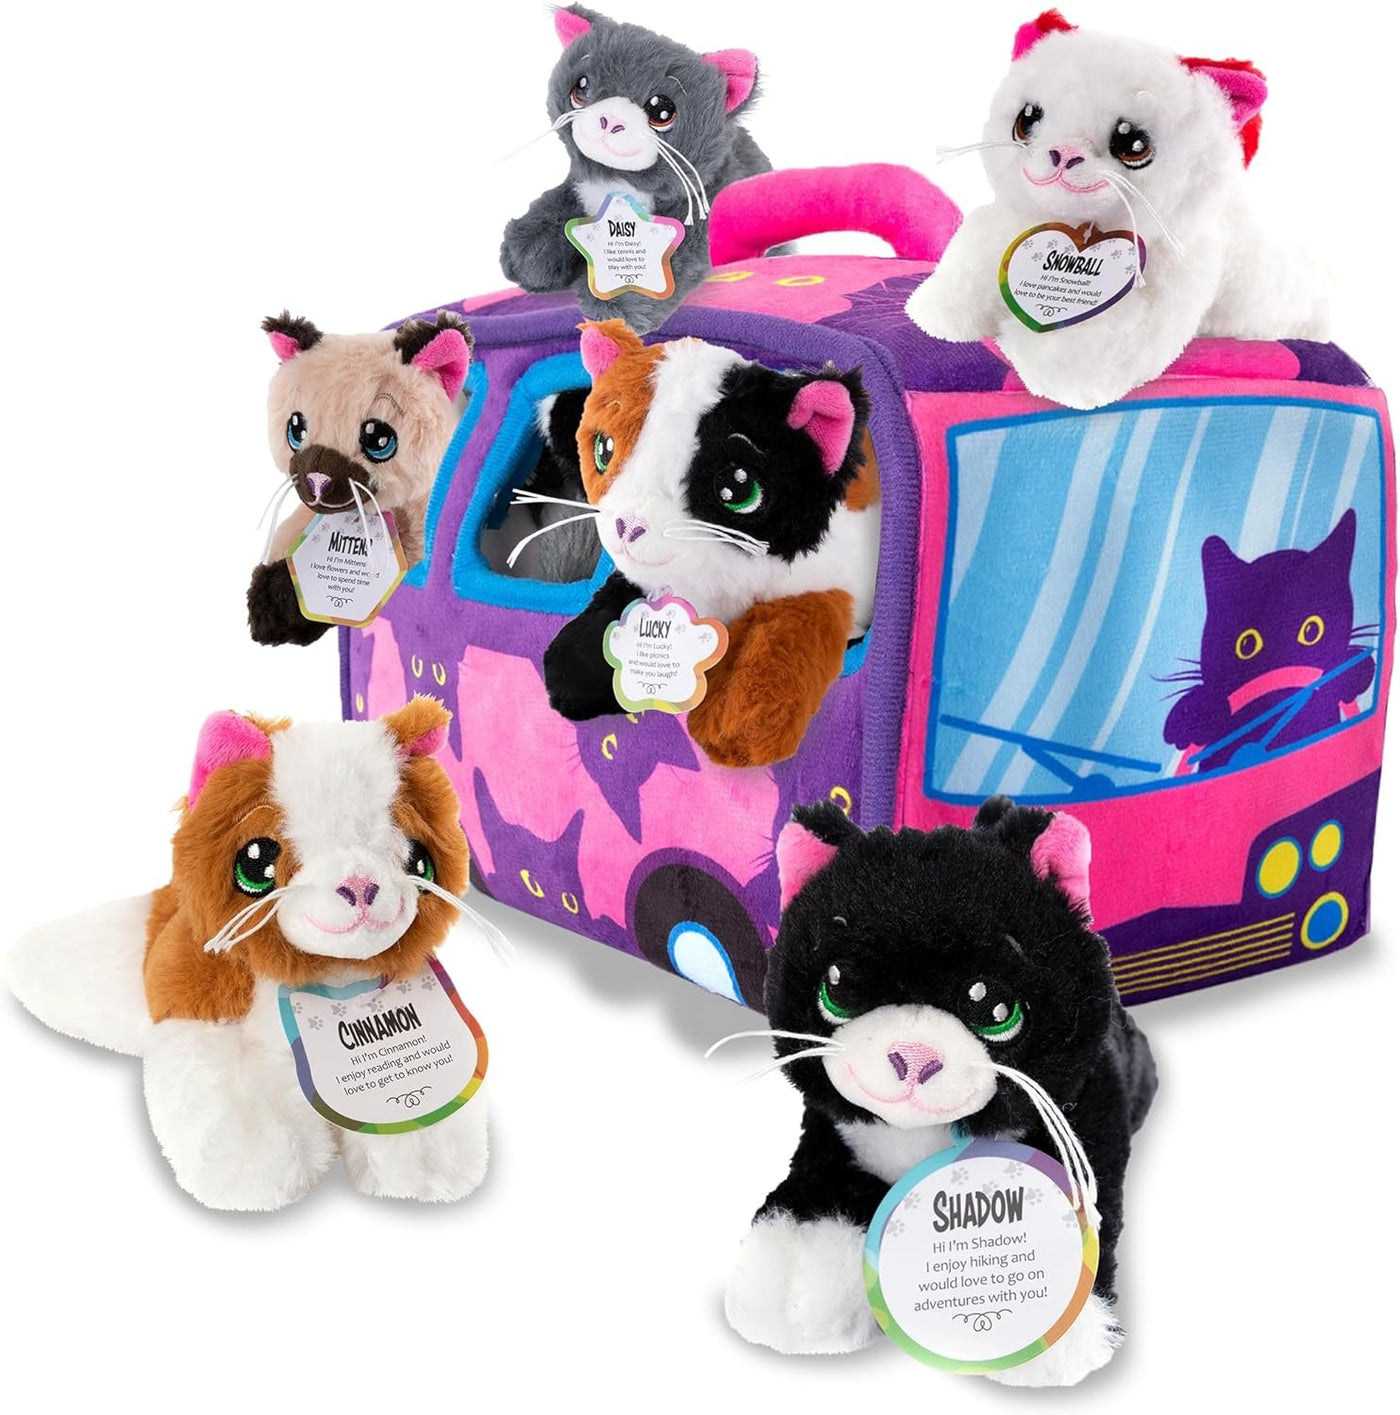 Kitten Stuffed Animals, 6 Stuffed Cat Plush with Carrier Bus House Playset, Kitty Toys Birthday Gifts for Girls and Boys, Stuffed Animals in Bulk for Classroom Party, Travel Road Trip